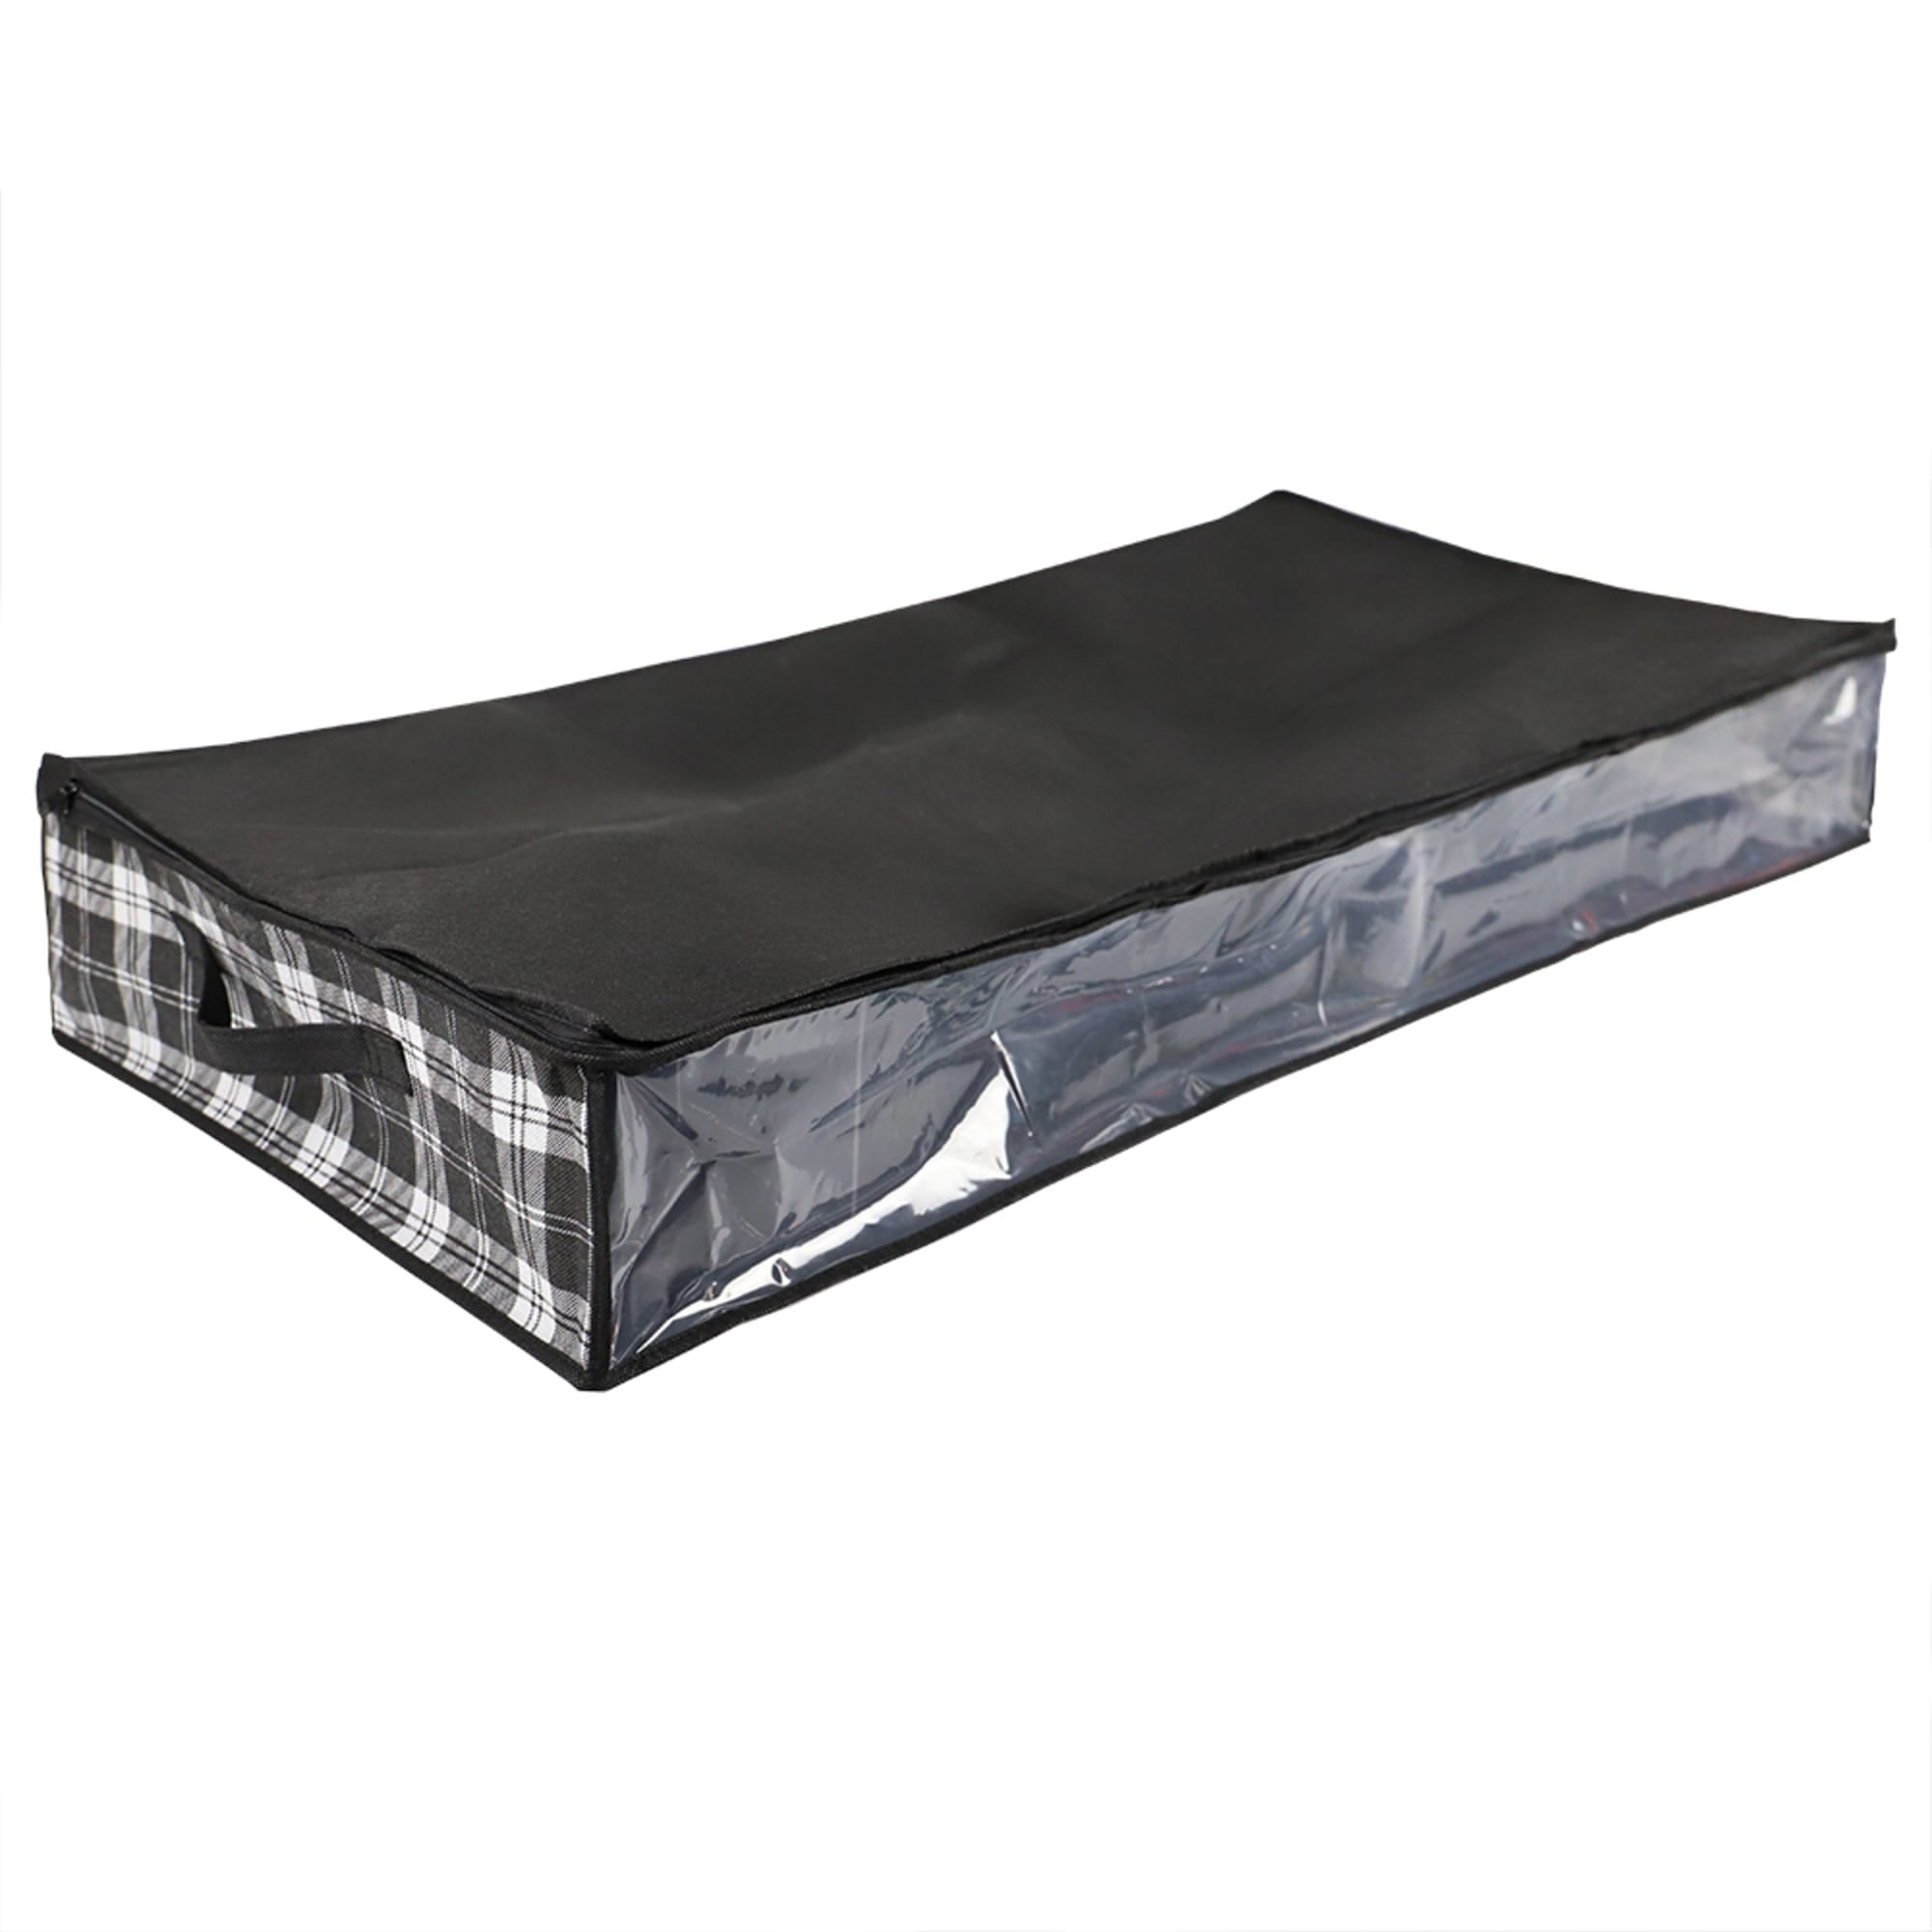 Home Basics Plaid Non-Woven Under the Bed Storage Bag with See-through Front Panel, Black
 $4.00 EACH, CASE PACK OF 12